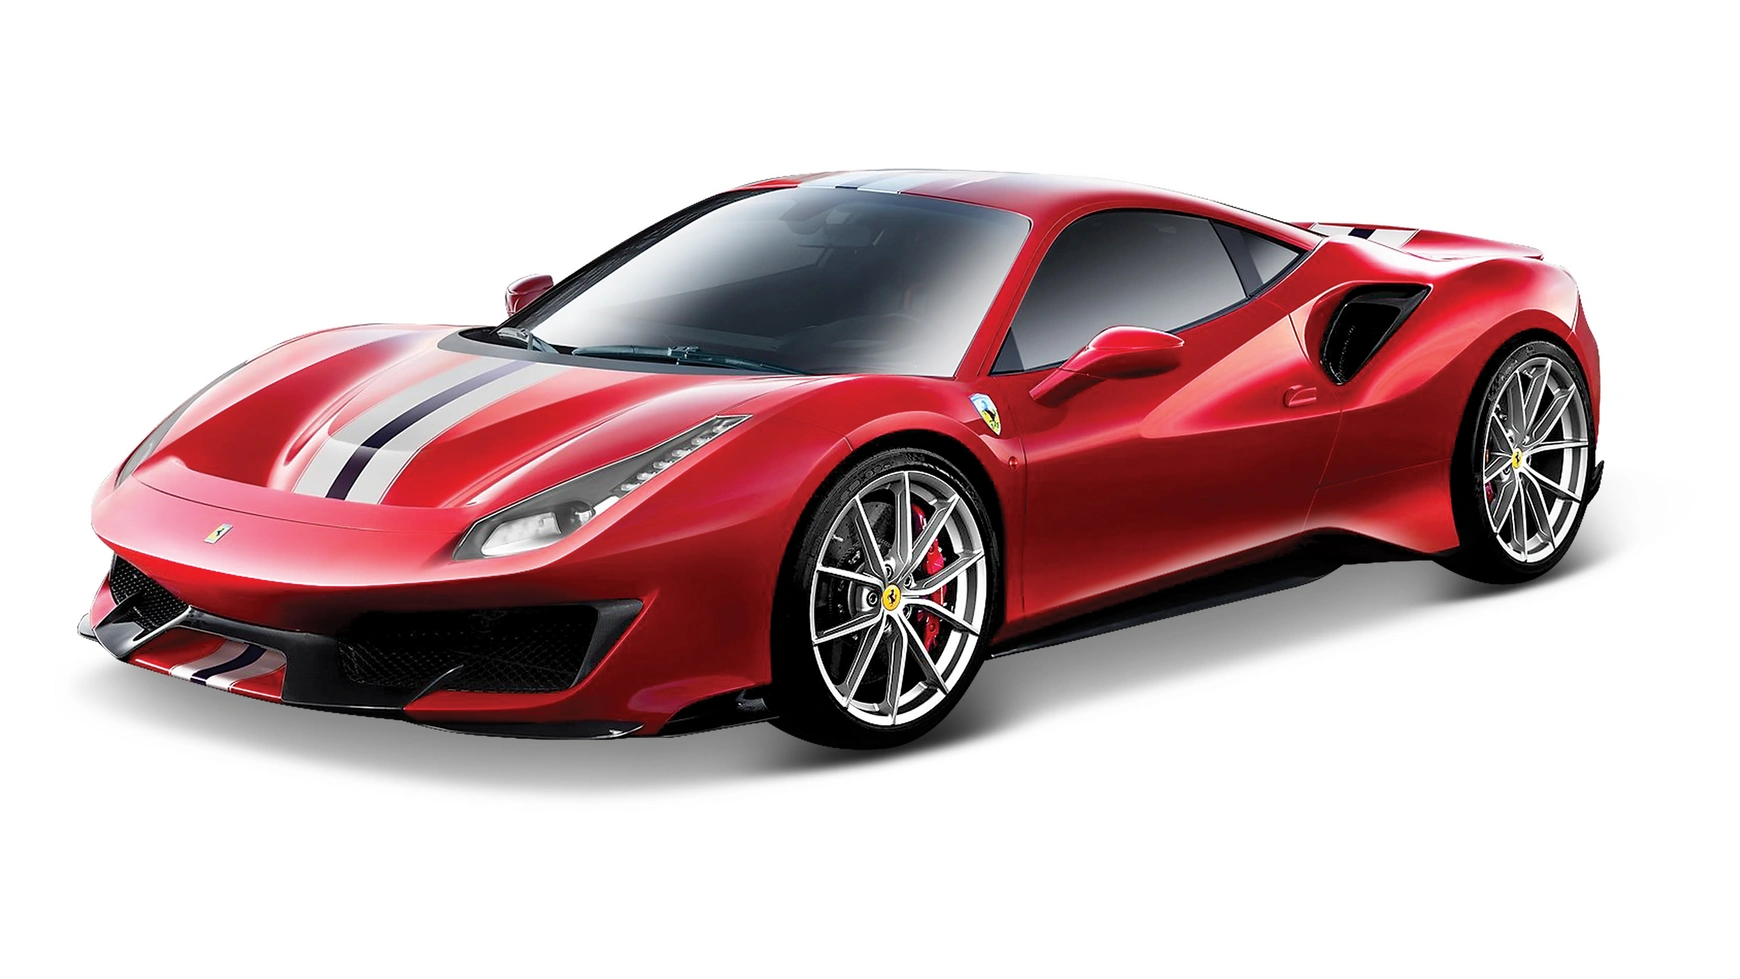 Bburago 1:24 FERRARI 488 PISTA bburago 1 24 ferrari 488 pista sports car static die cast vehicles collectible model car toys